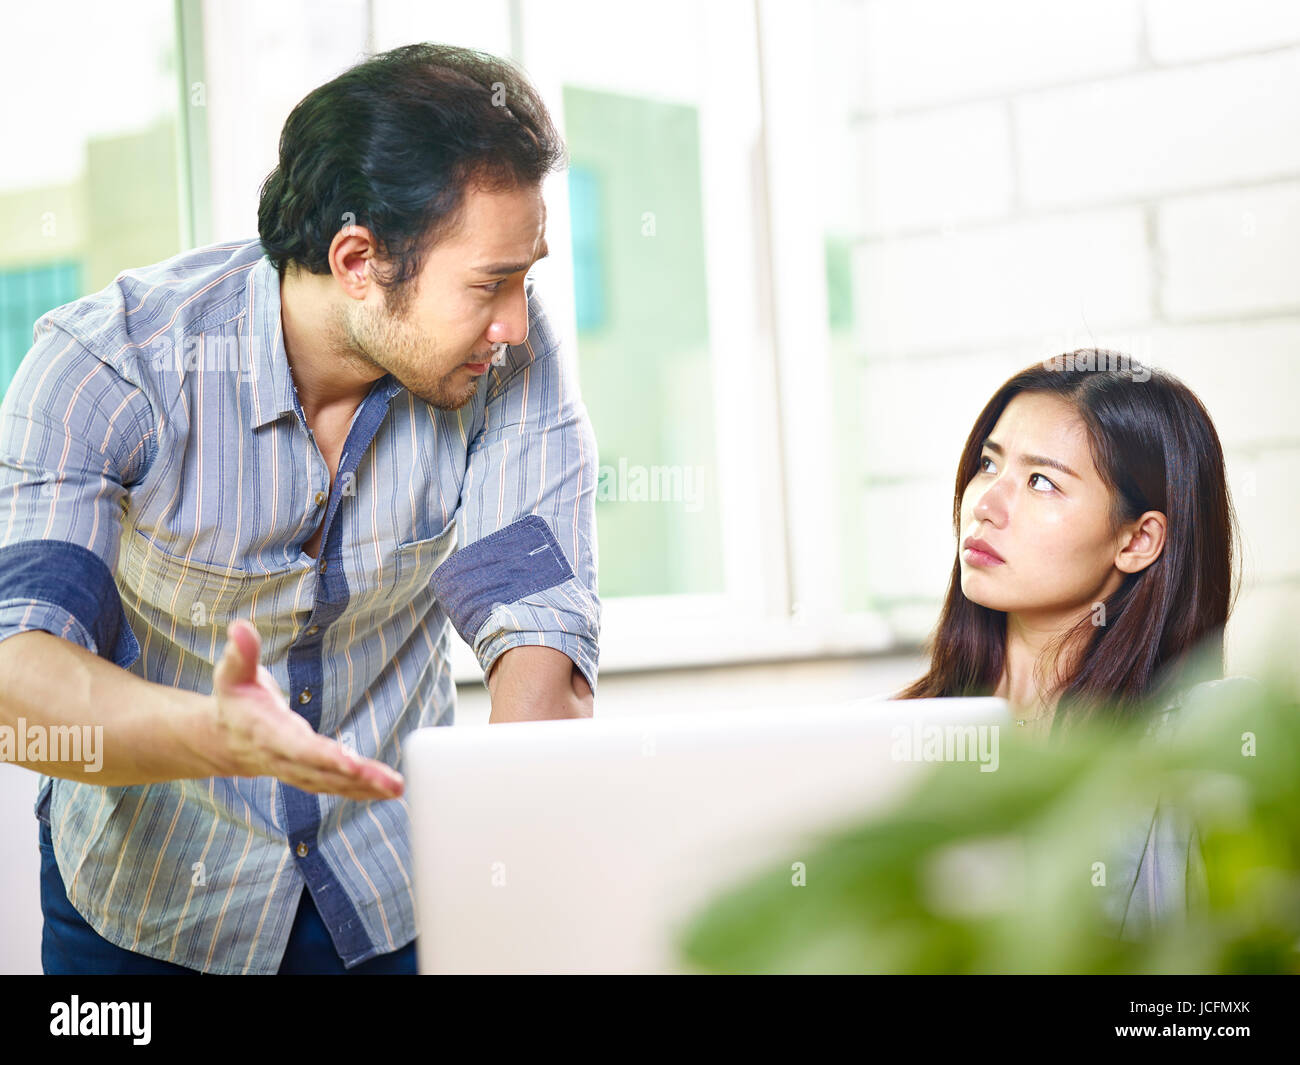 young asian corporate people having an argument in office. Stock Photo